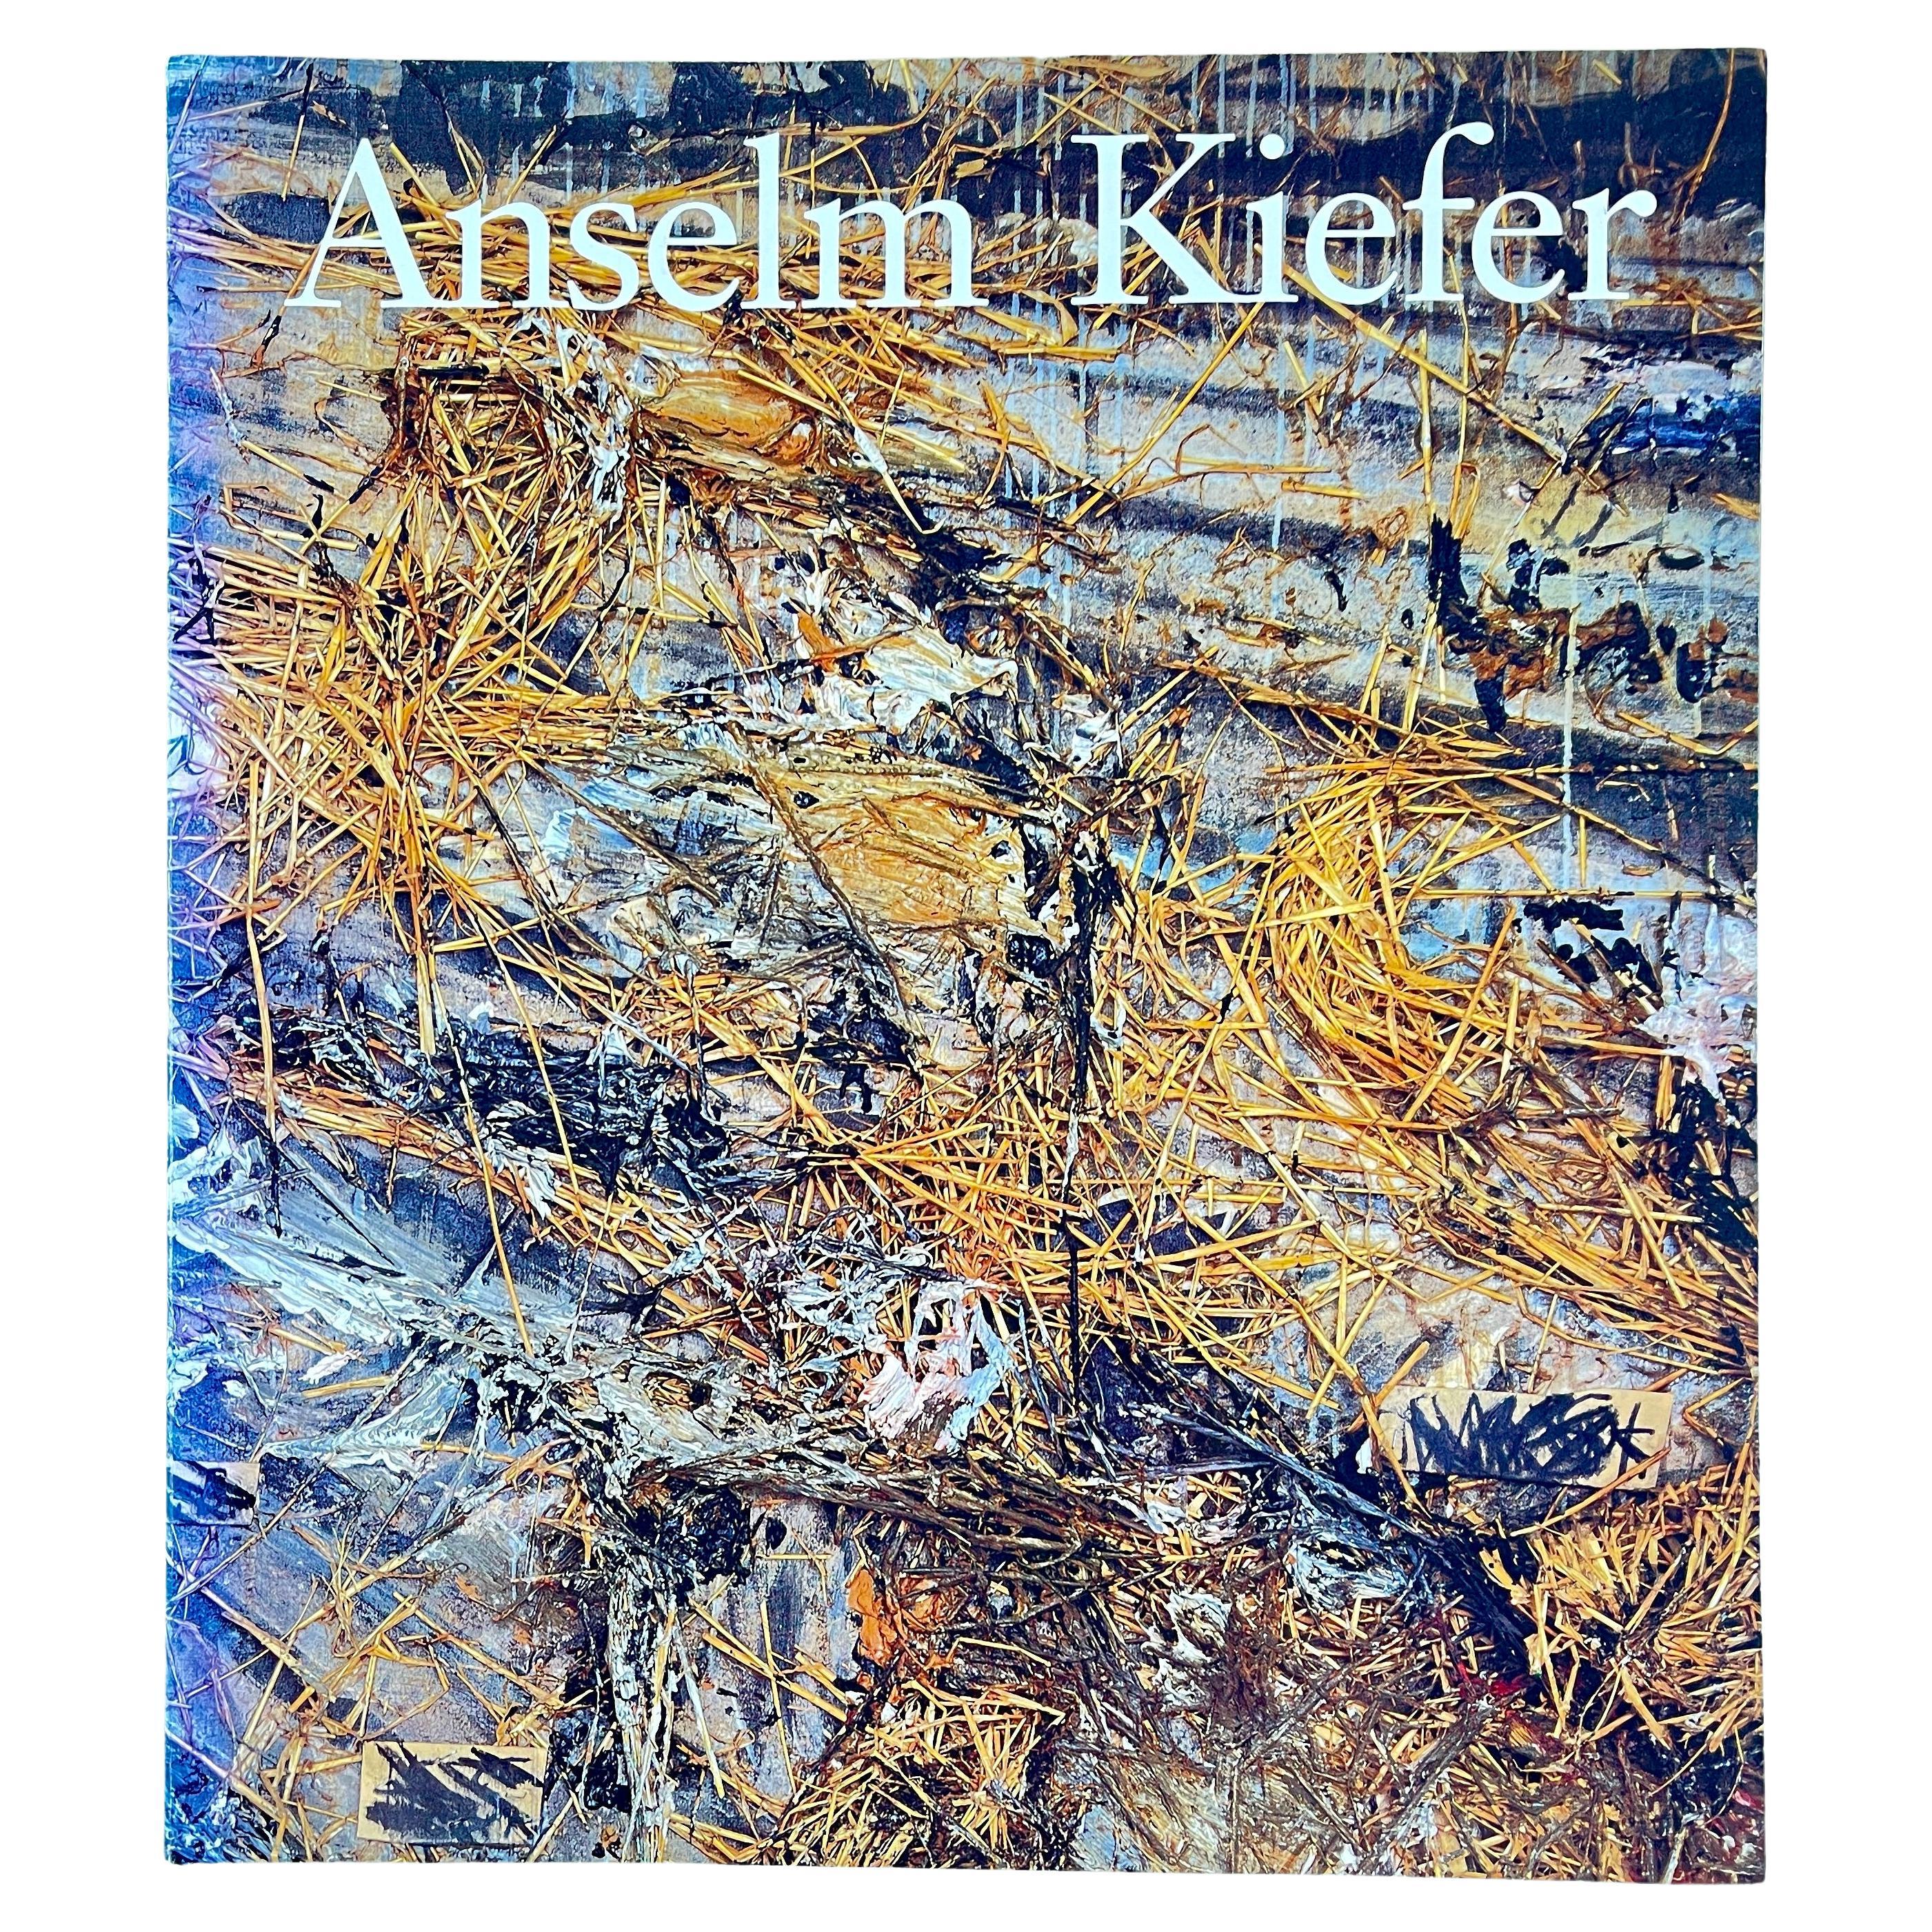 Anselm Kiefer by Mark Rosenthal, Museum Edition Trade Paperback, 1987